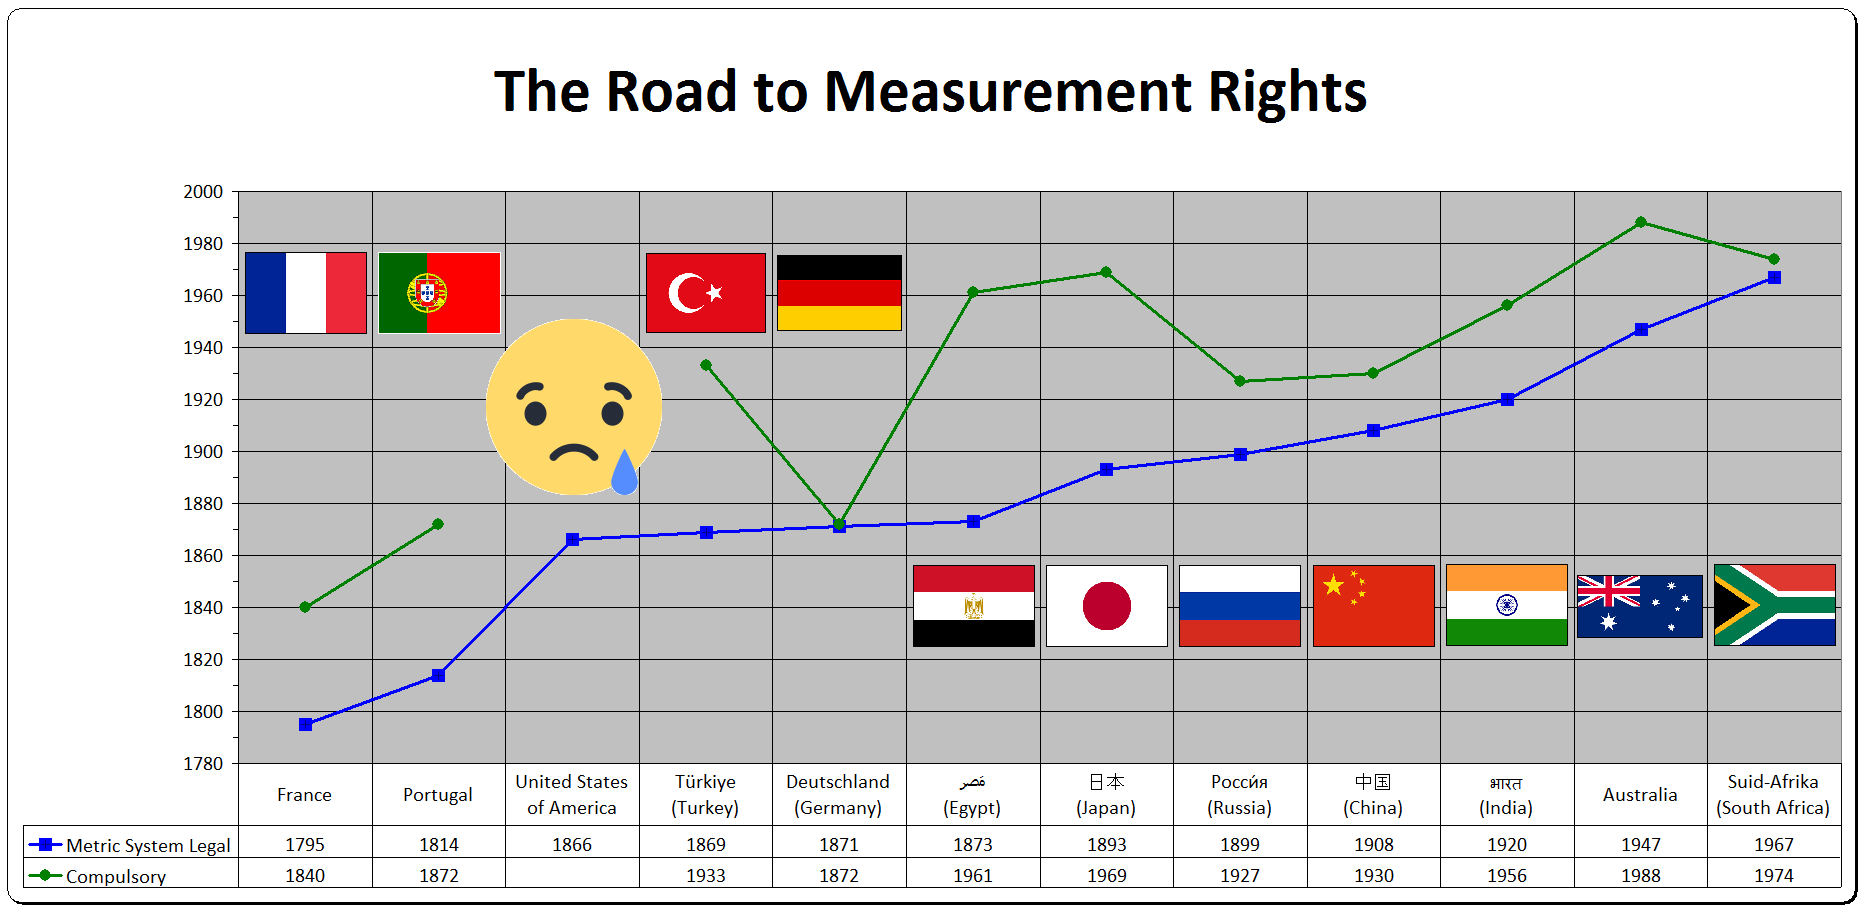 The Road to Measurement Rights